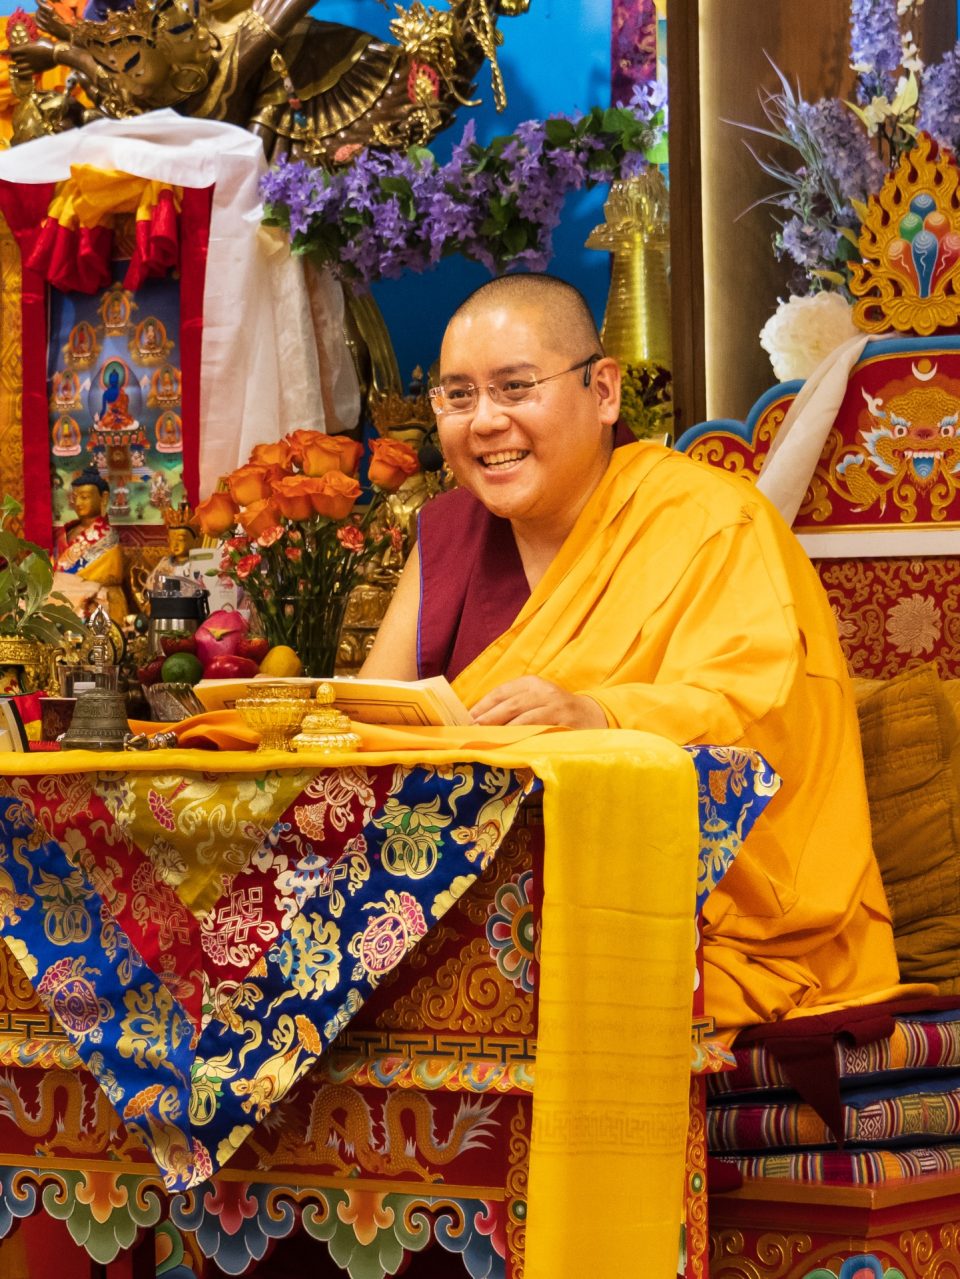 His Eminence Ling Rinpoche’s 2024 US Tour and Remarks Regarding Lama Zopa Rinpoche